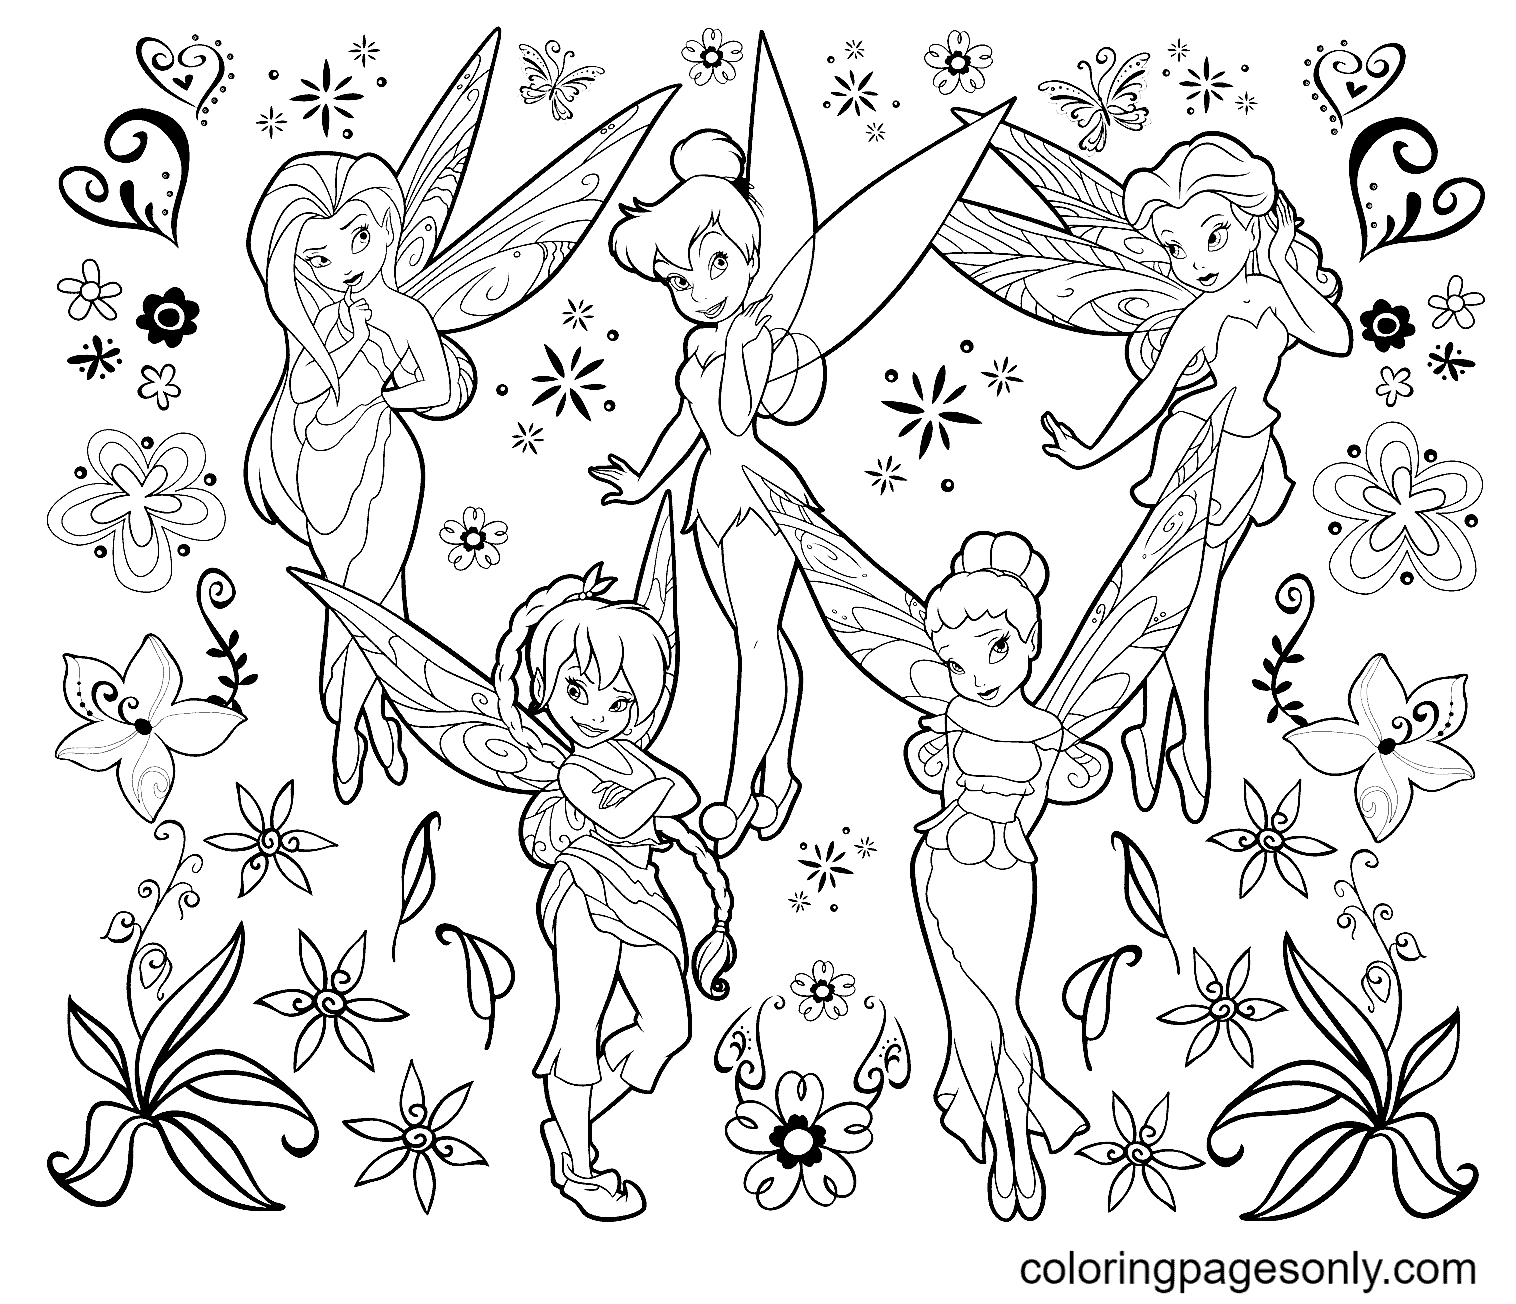 Tinkerbell and Beautiful Fairy Disney Coloring Pages